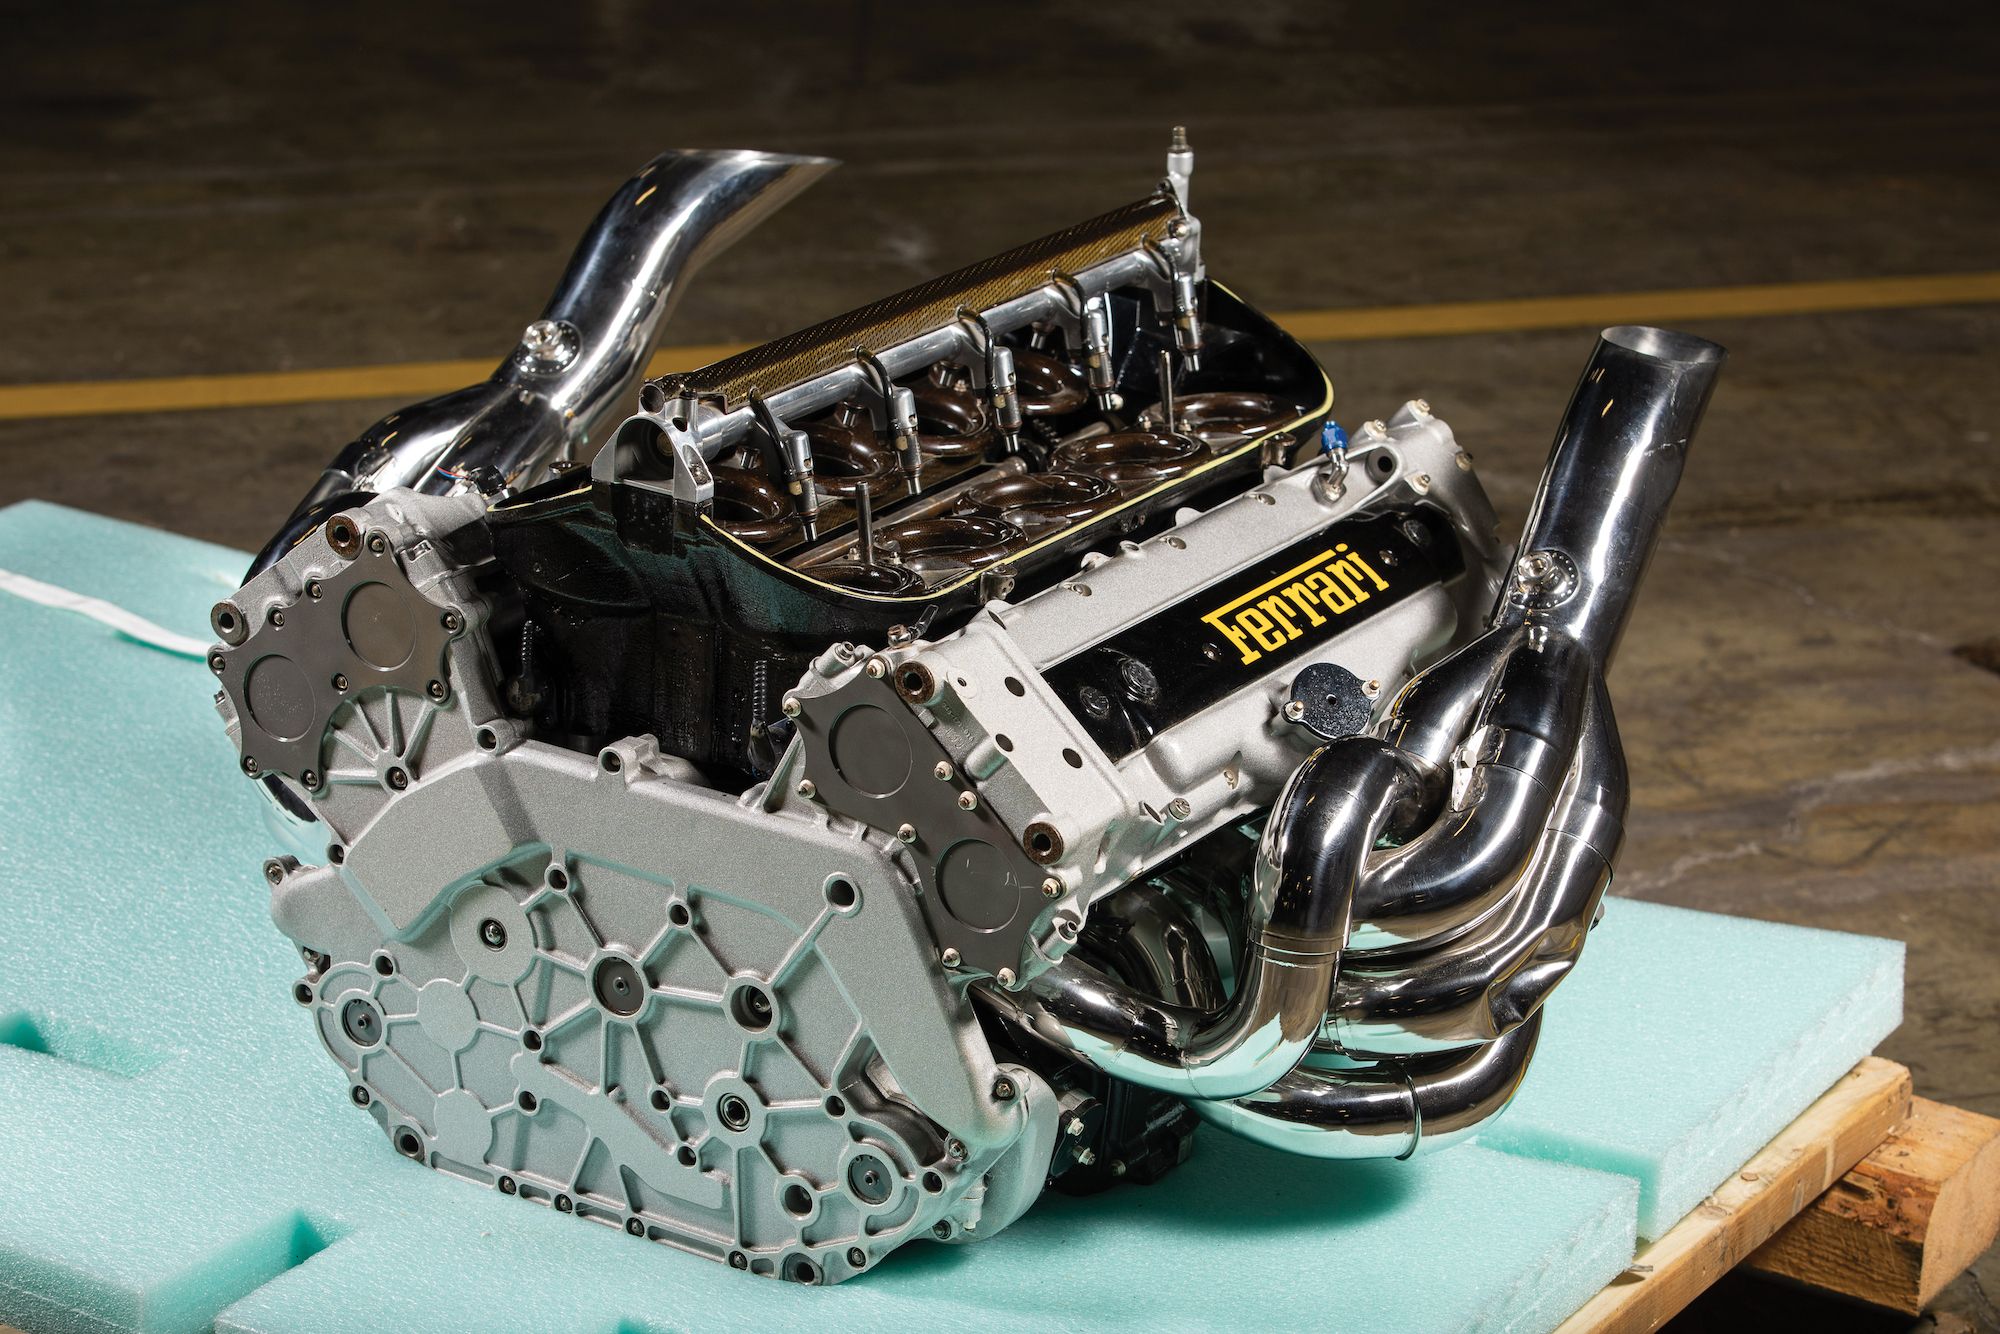 Pair of Ferrari V-10 Formula 1 Engines for Sale Right Now